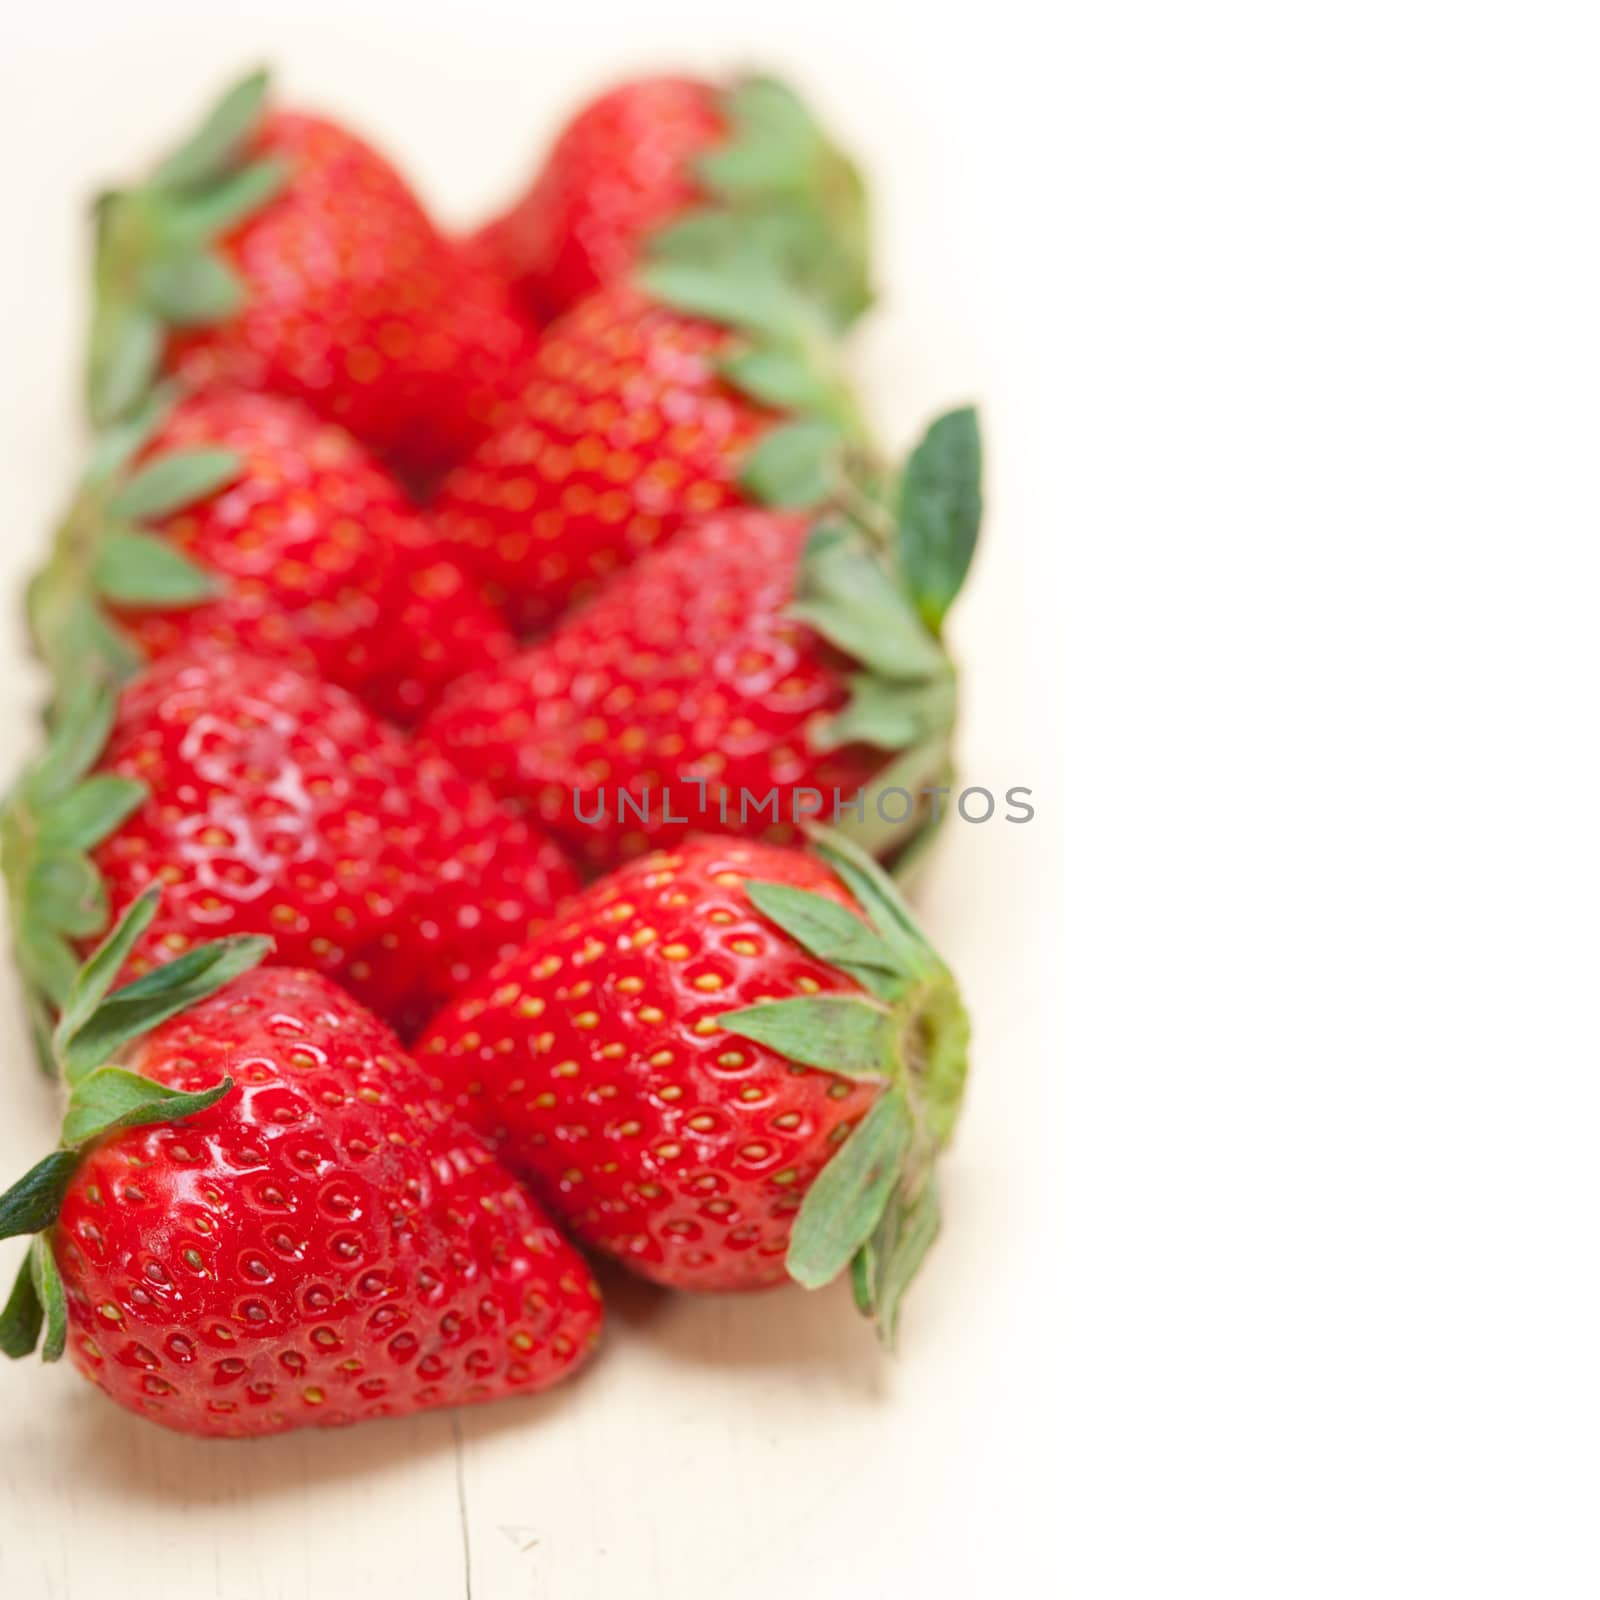 fresh organic strawberry over white rustic wood table